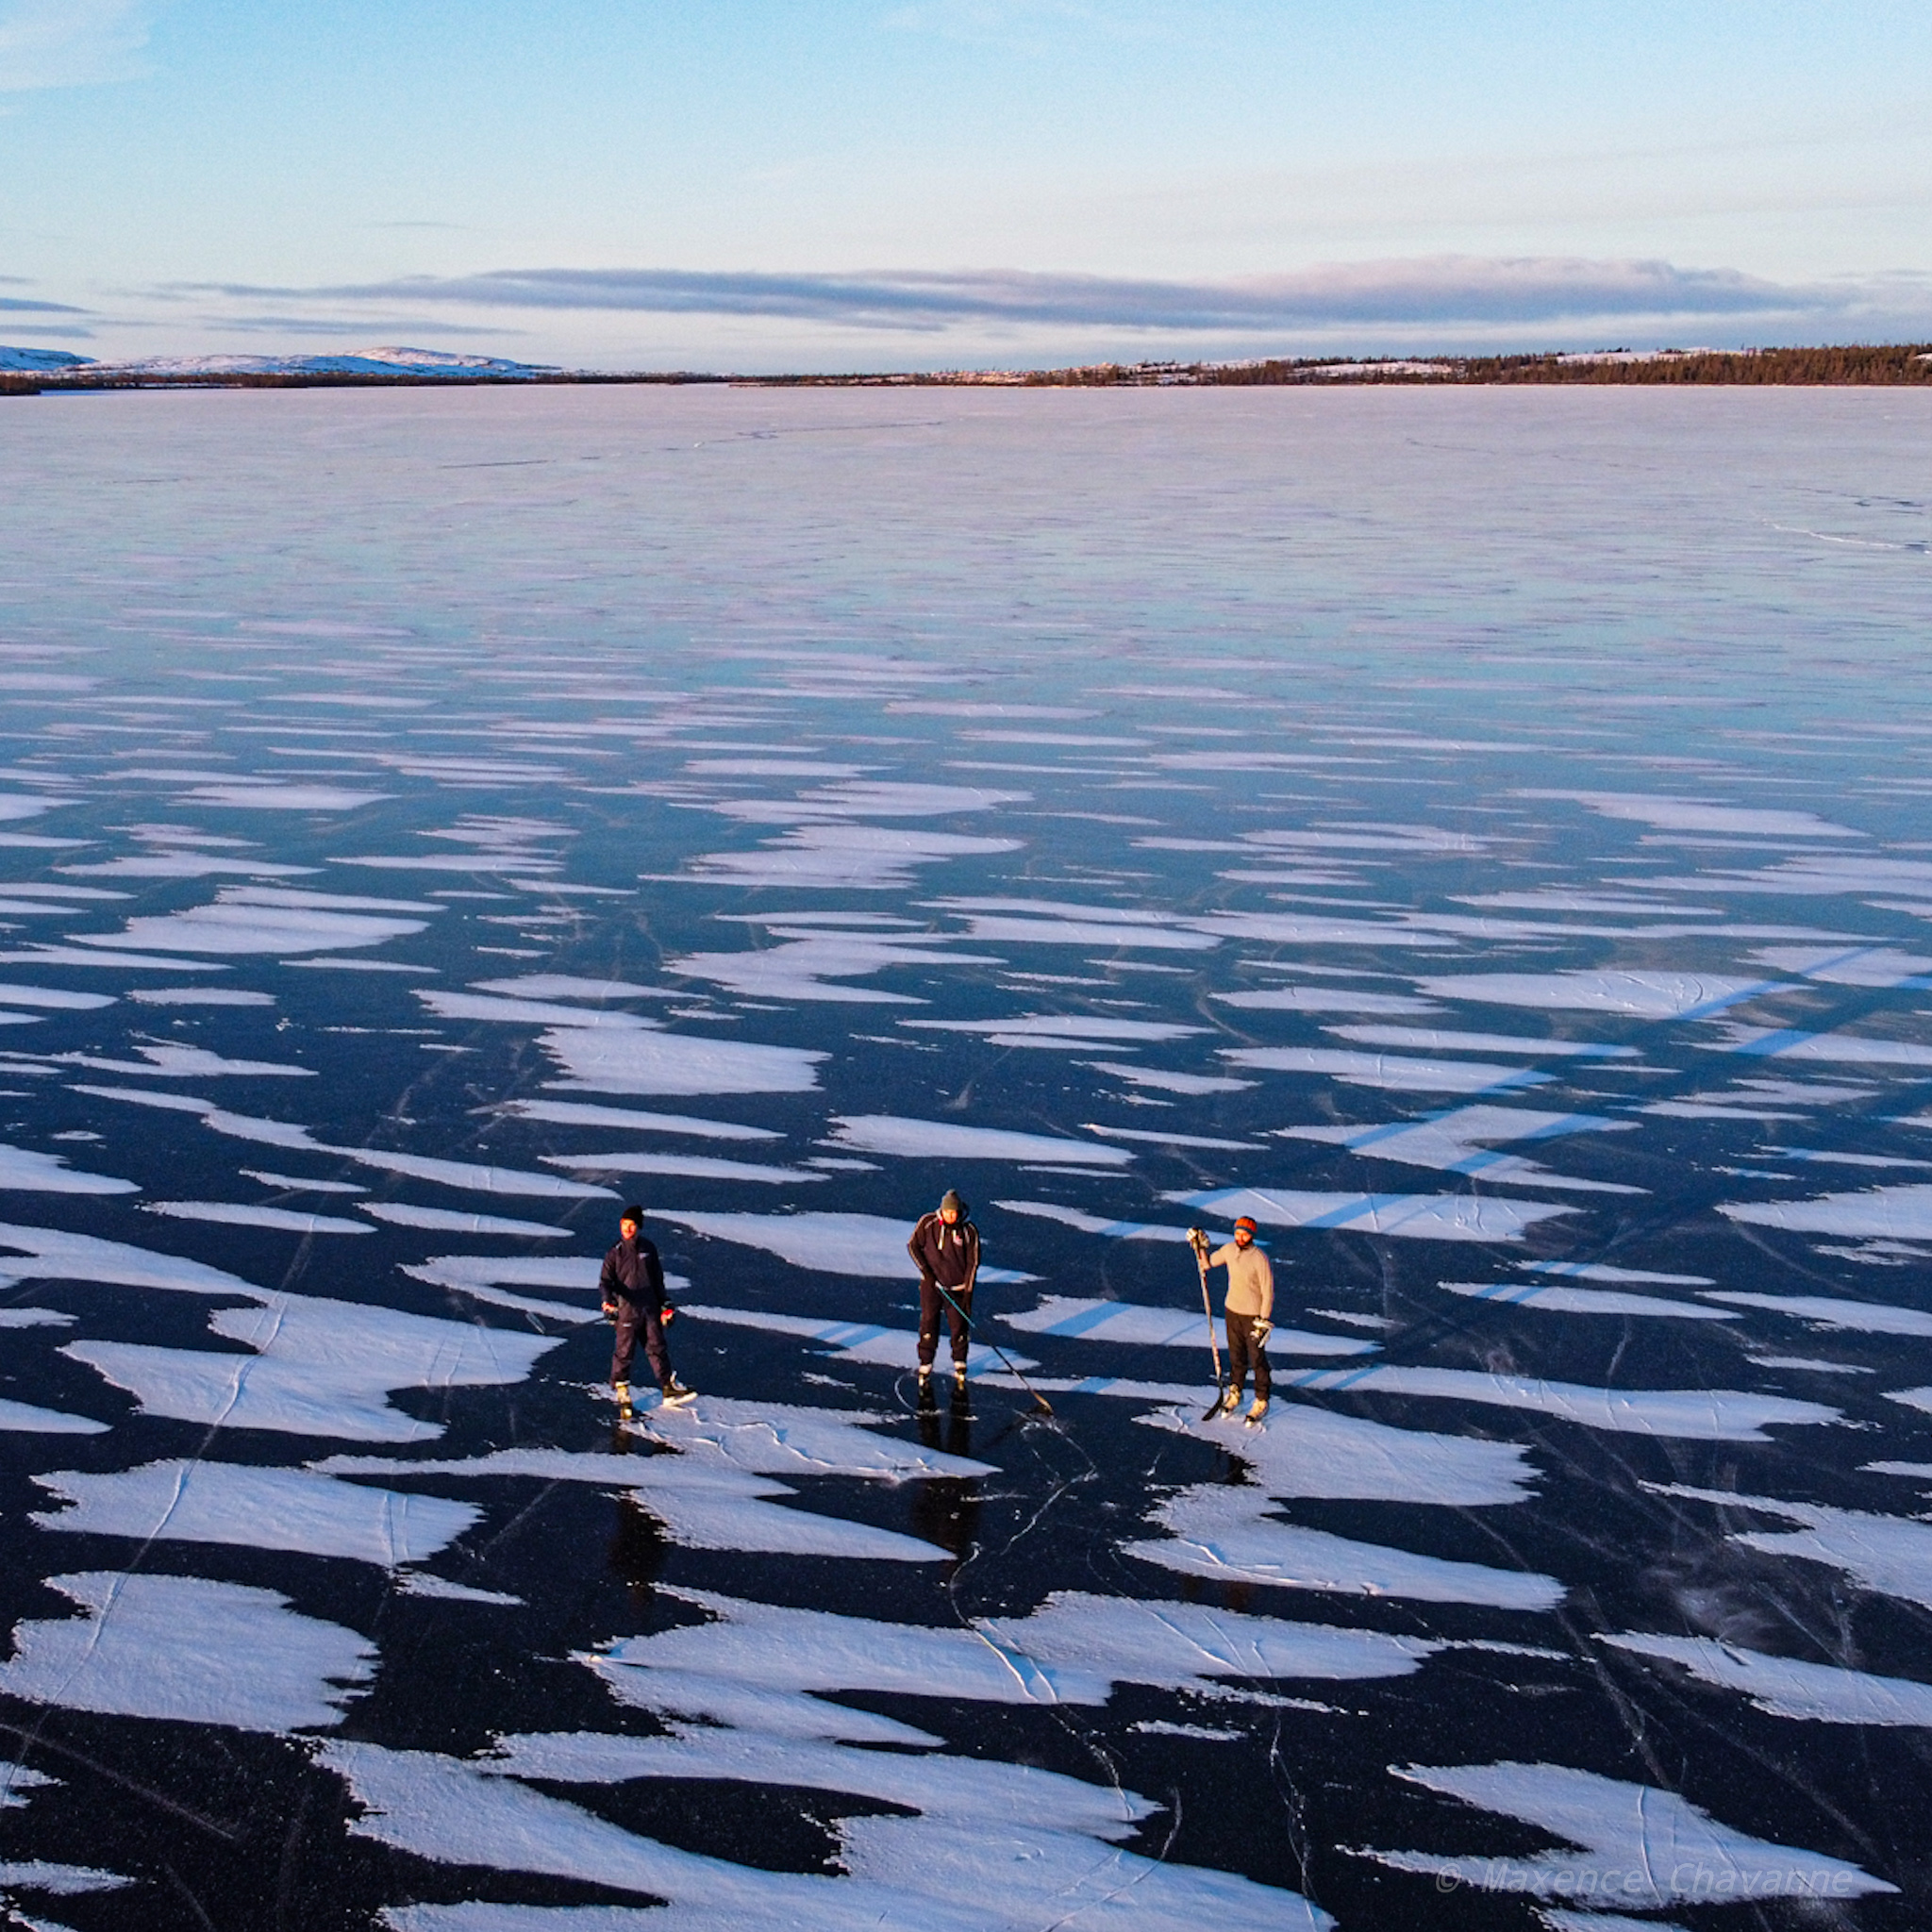 Three hockey players take to the ice on a recently frozen Stewart Lake near Kuujjuaq on Nov. 11. (Photo by Maxence Chavanne)